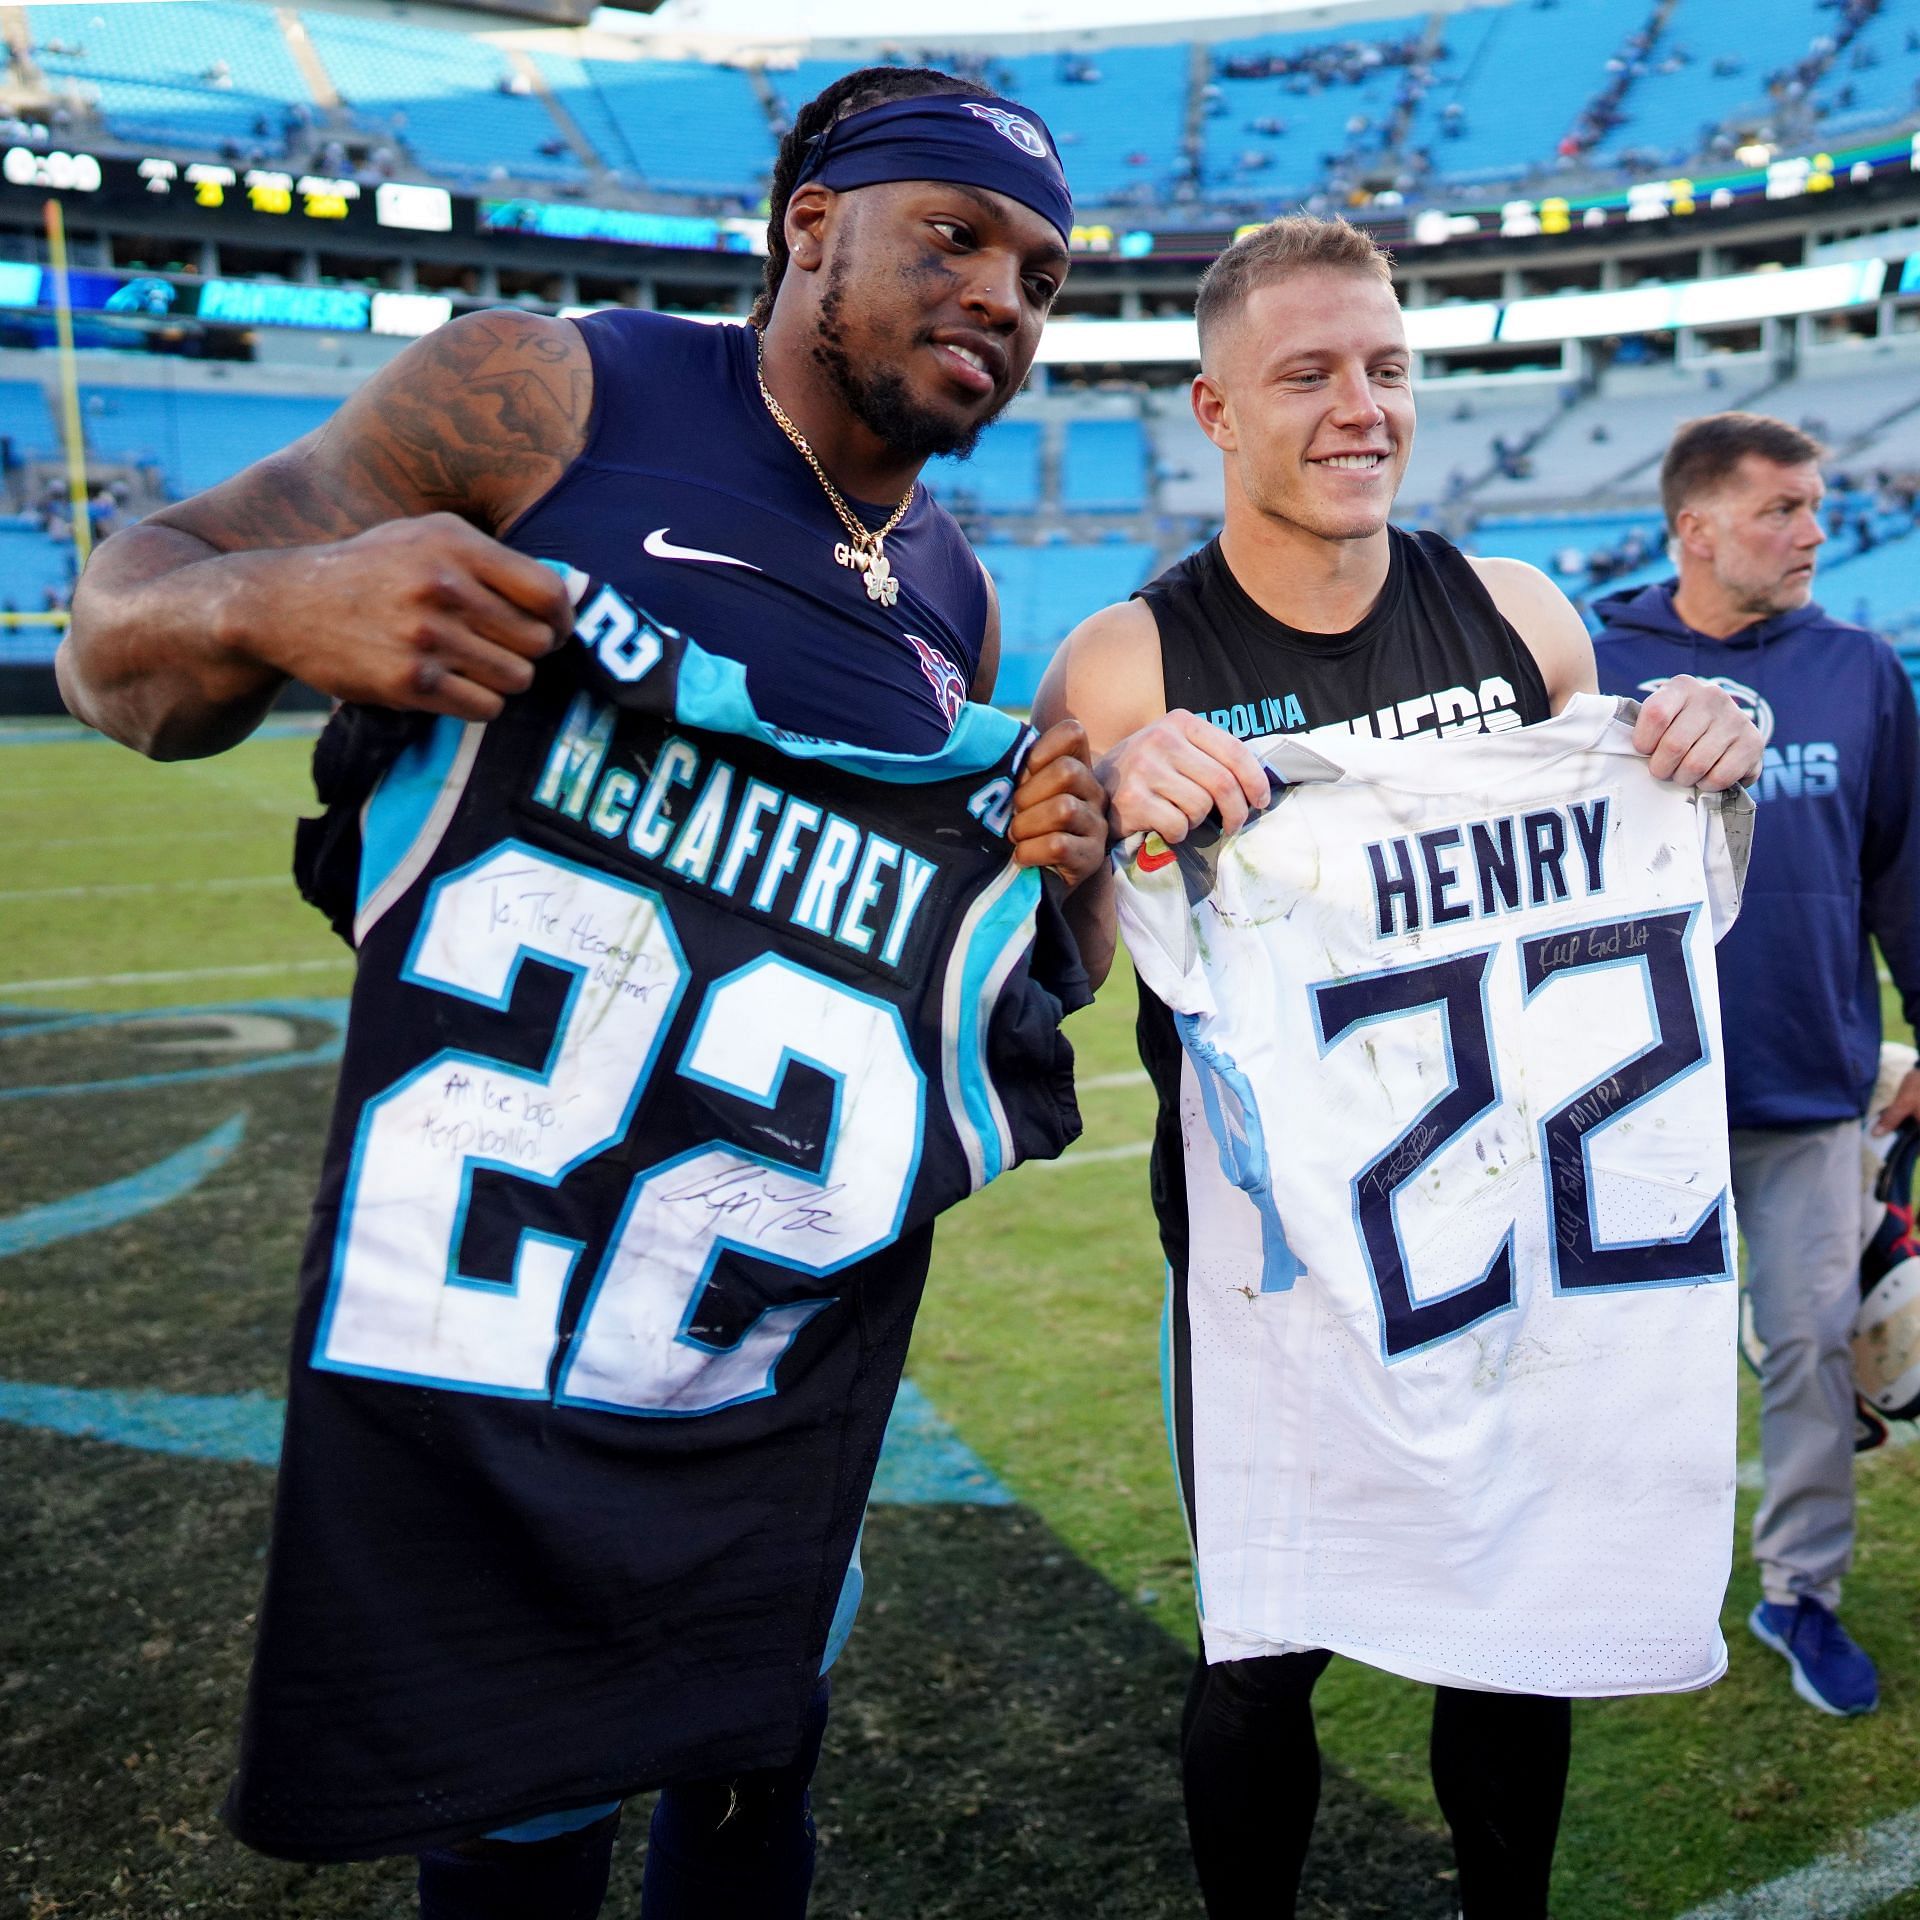 Could the McCaffrey deal be key for a Derrick Henry trade?